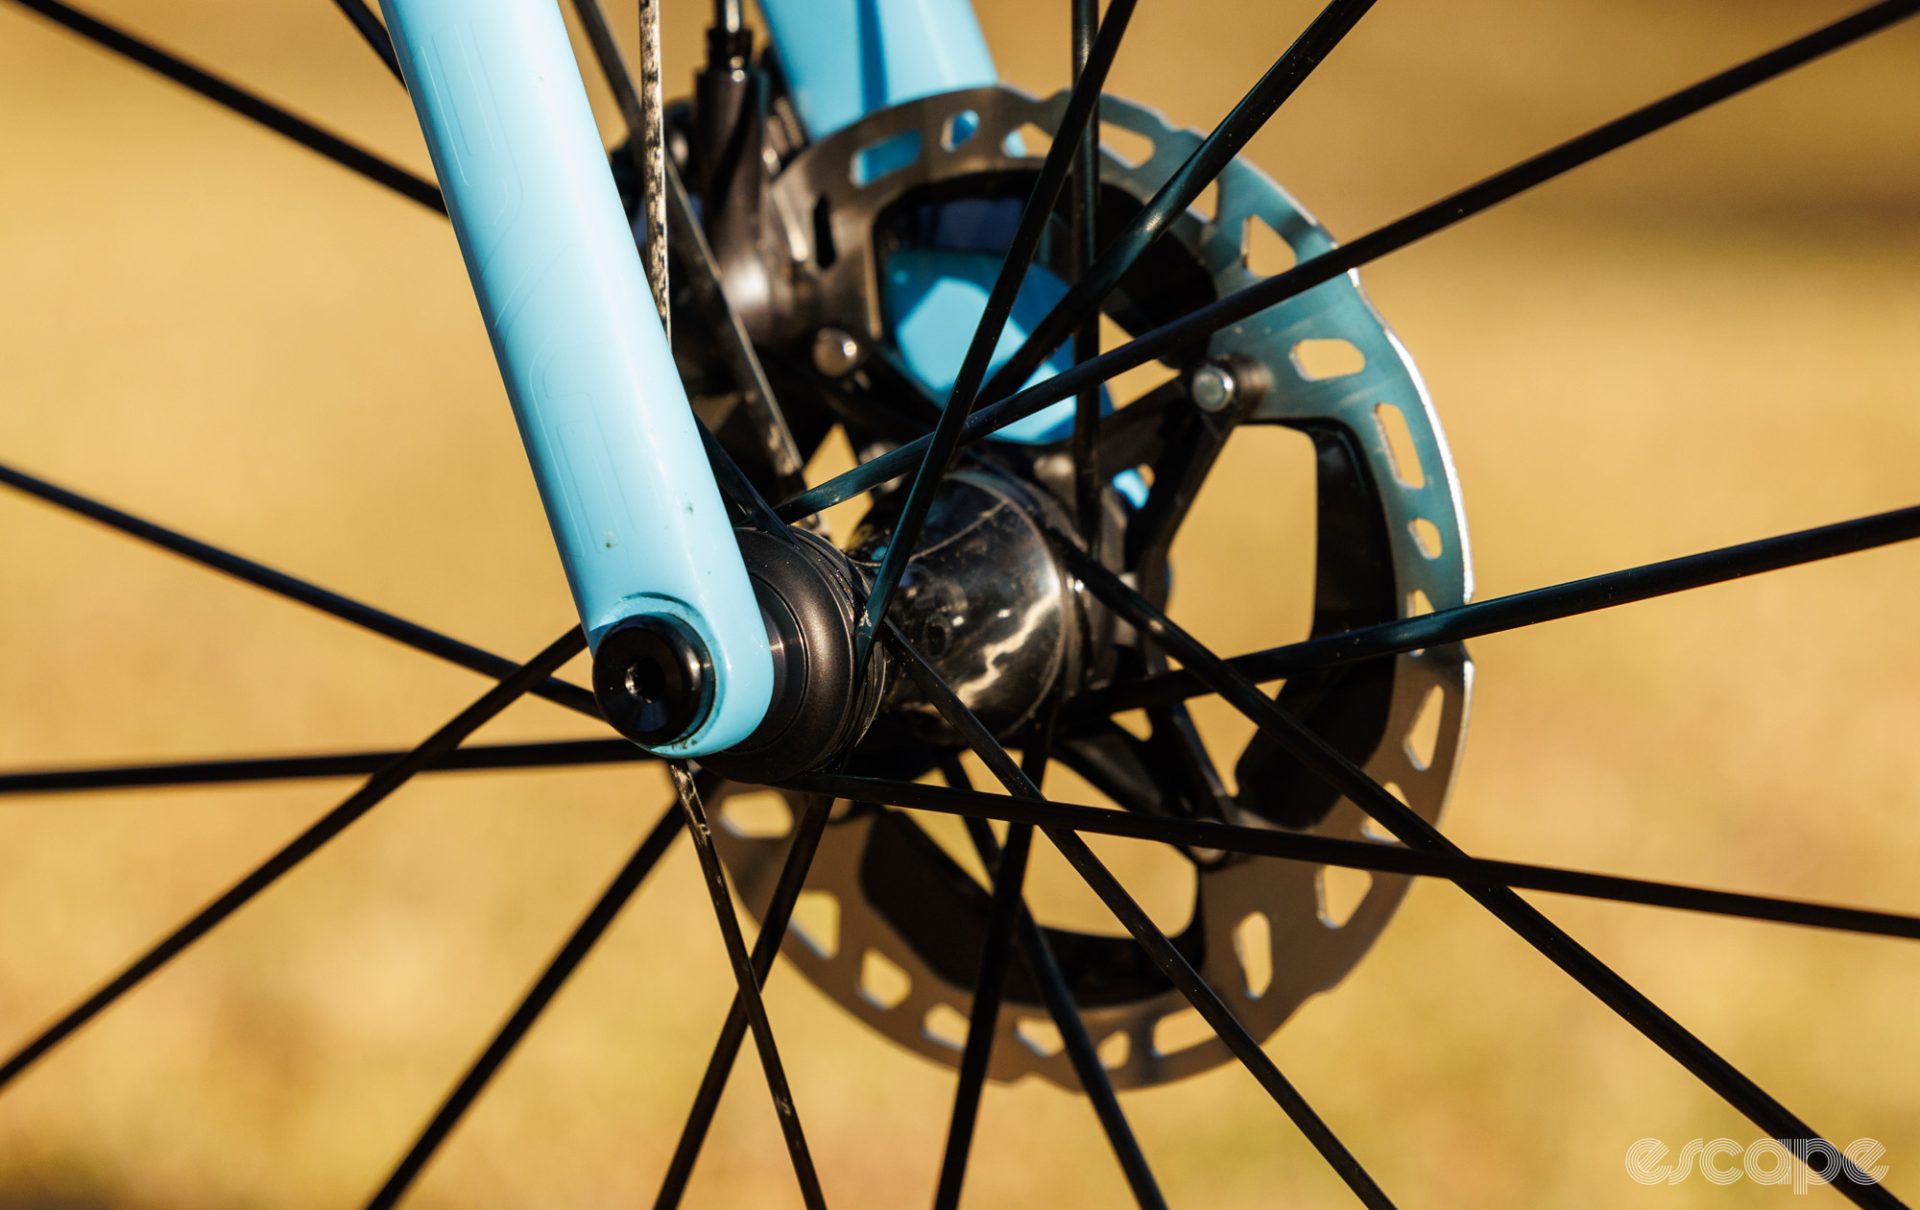 The front hub and disc rotor.